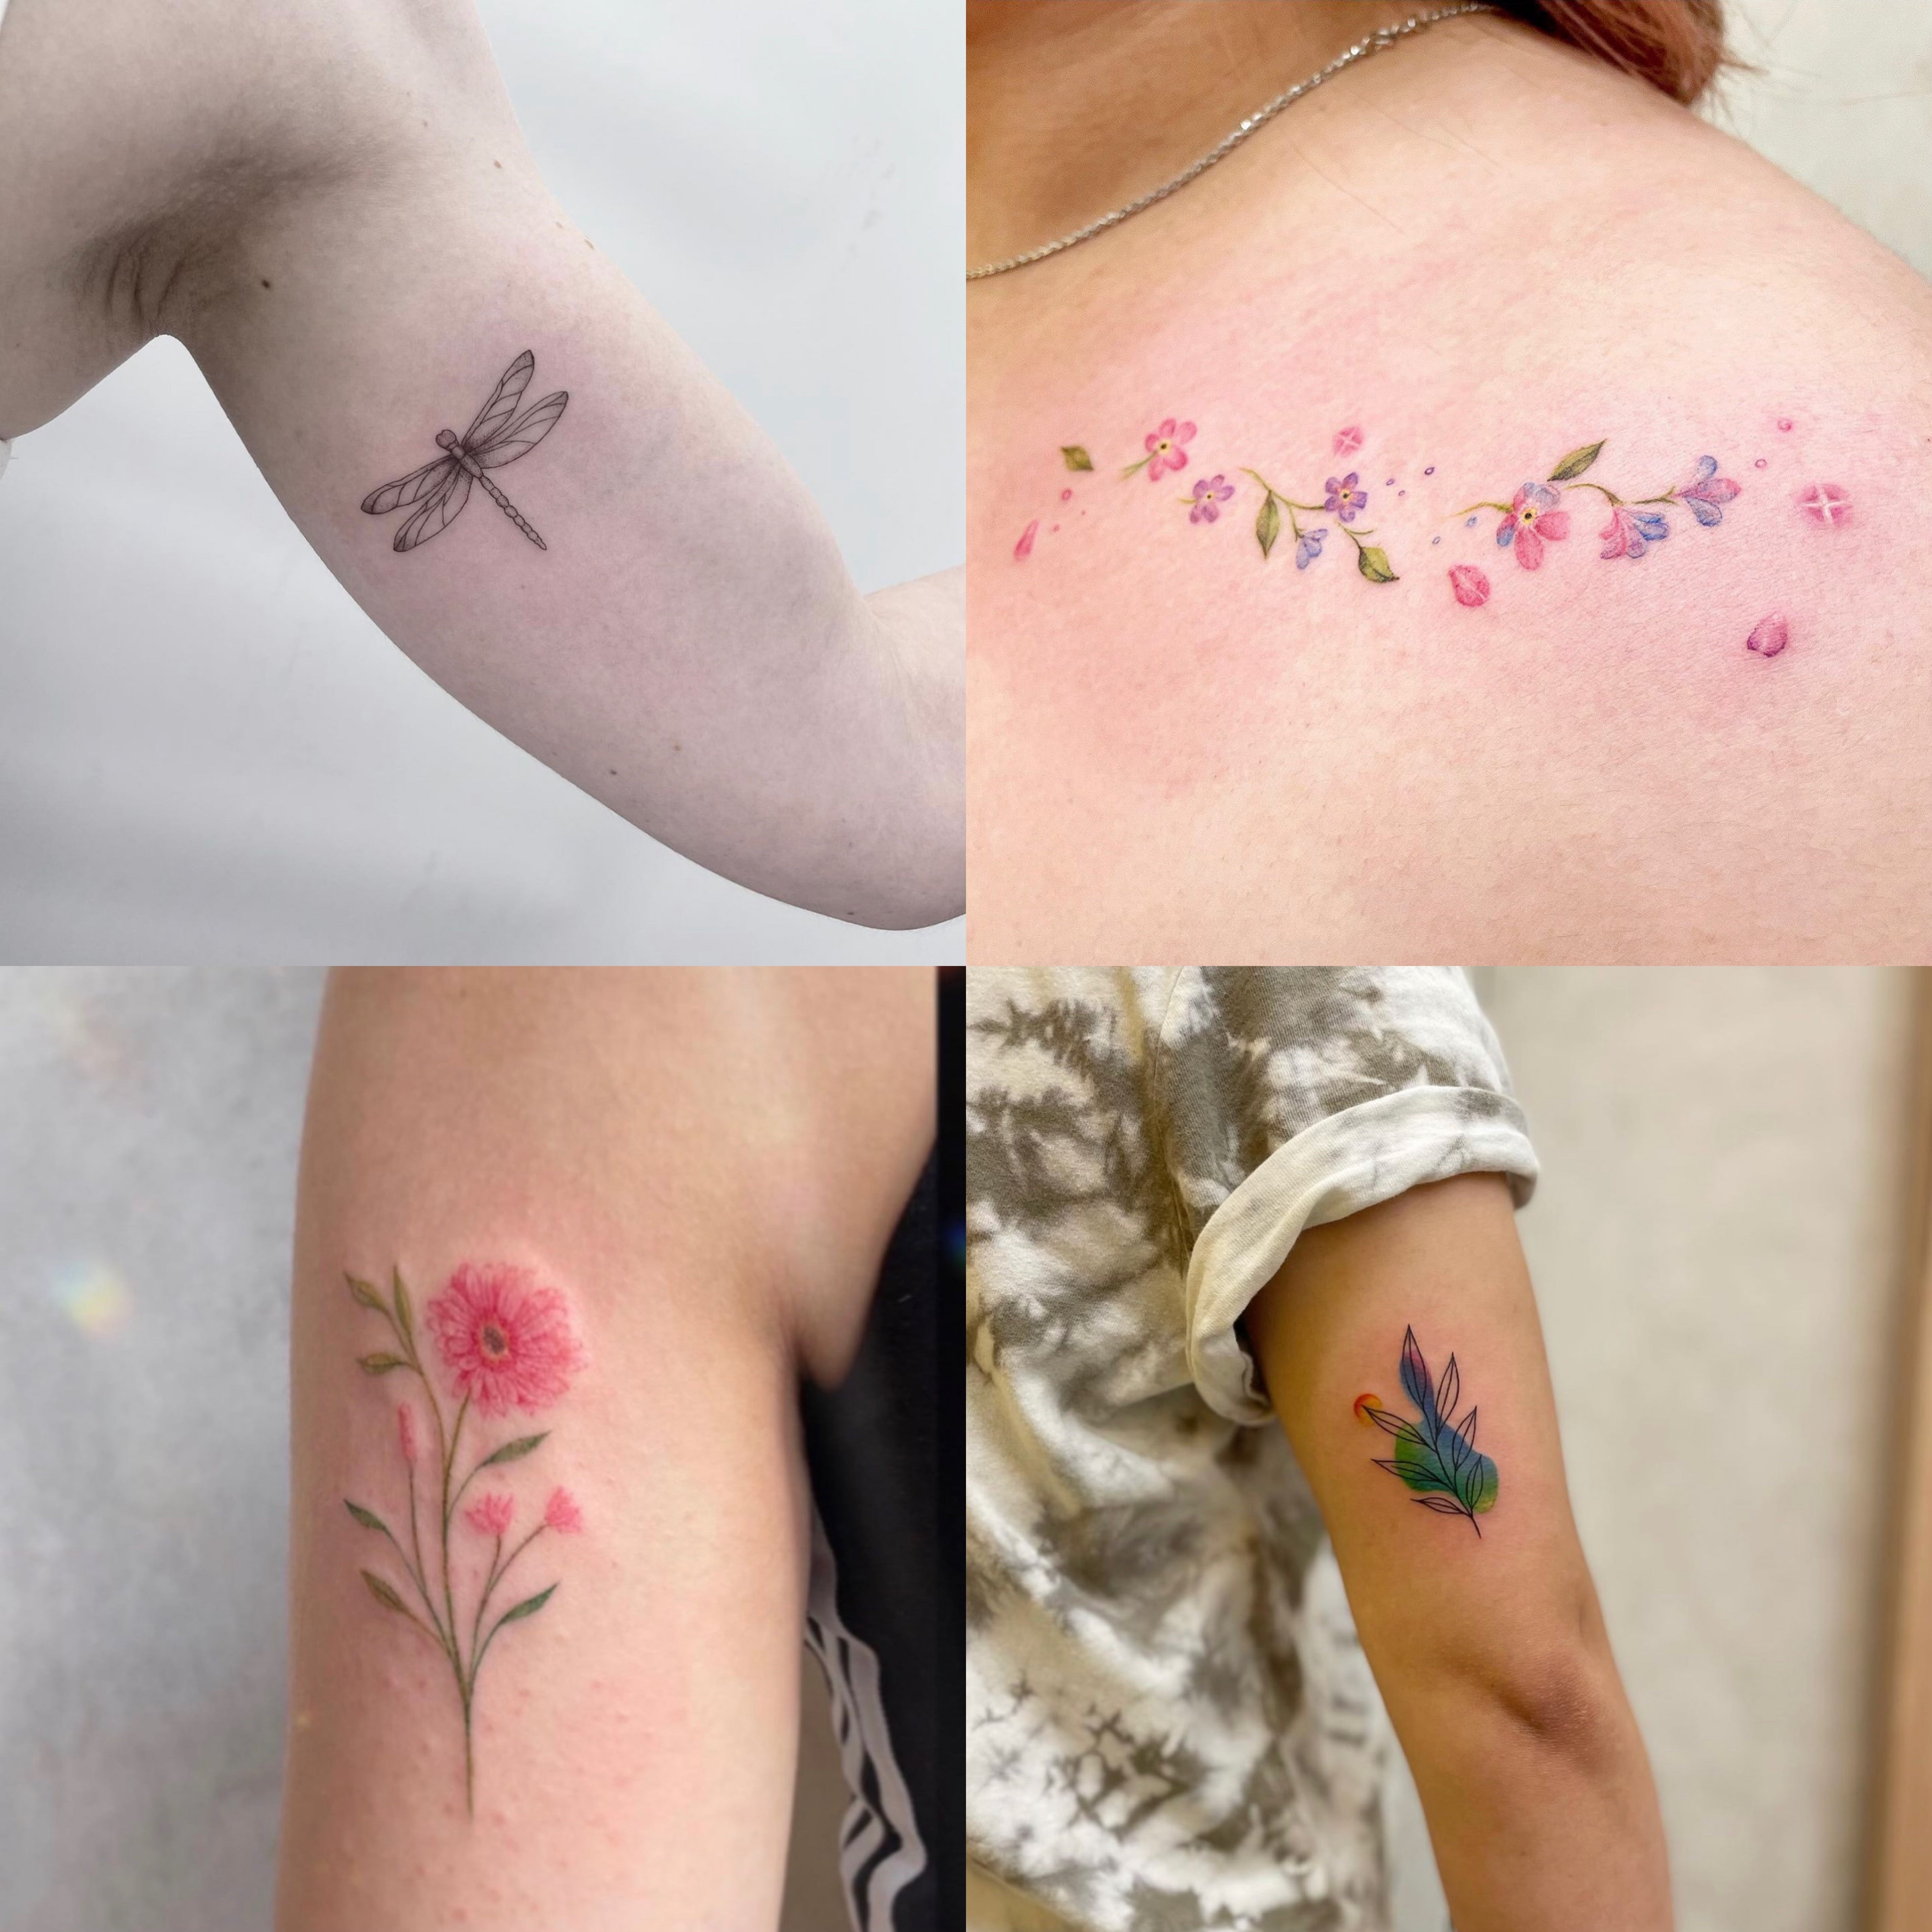 The 9 Emotional Stages Of Telling Your Mom You Got A Tattoo